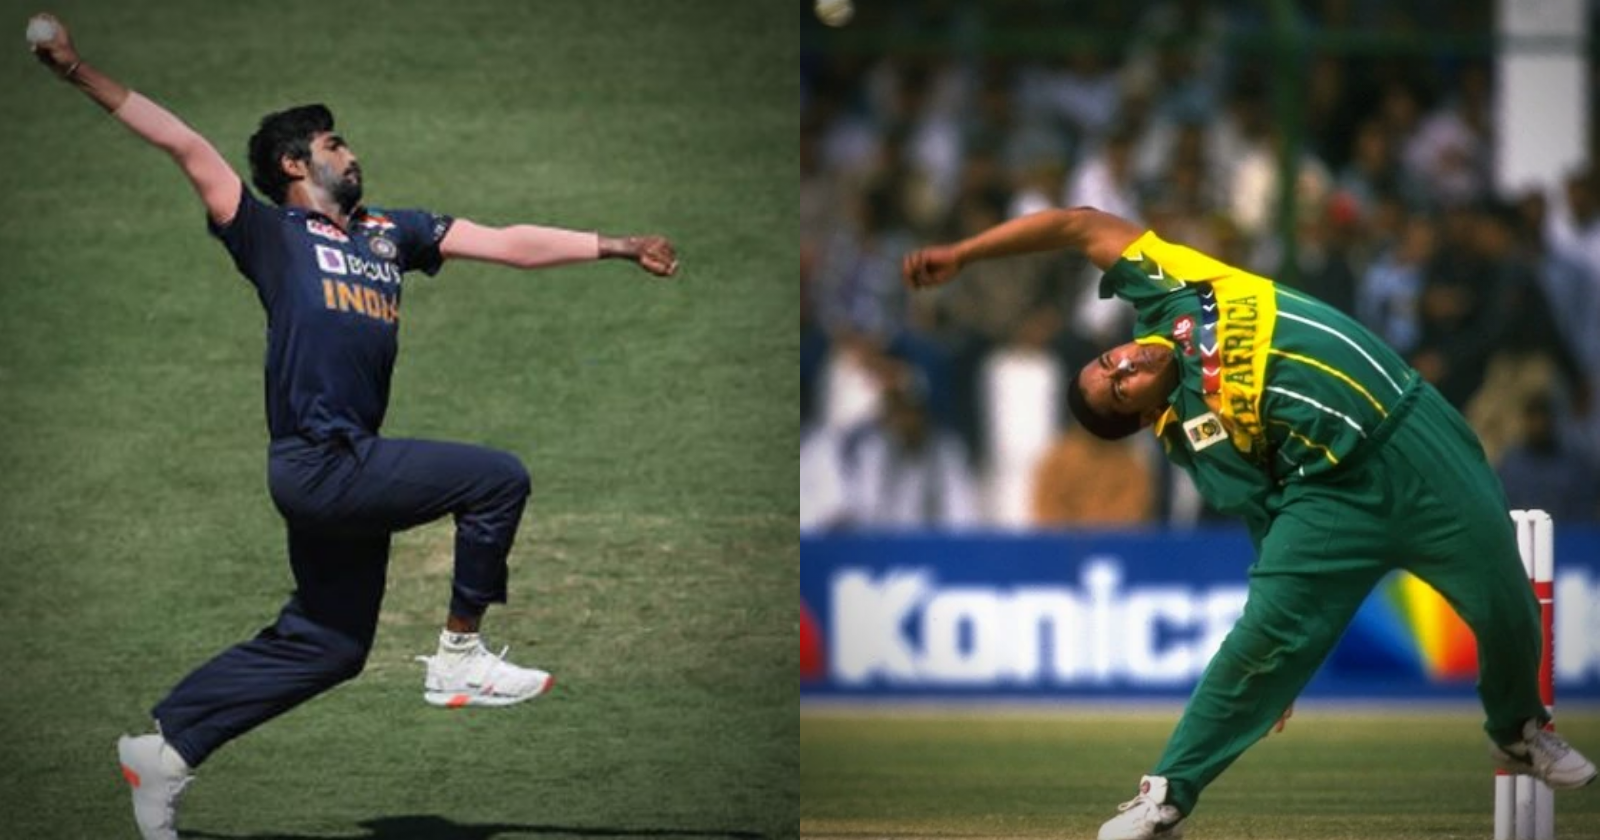 5 Bowlers With The Most Unorthodox Bowling Actions